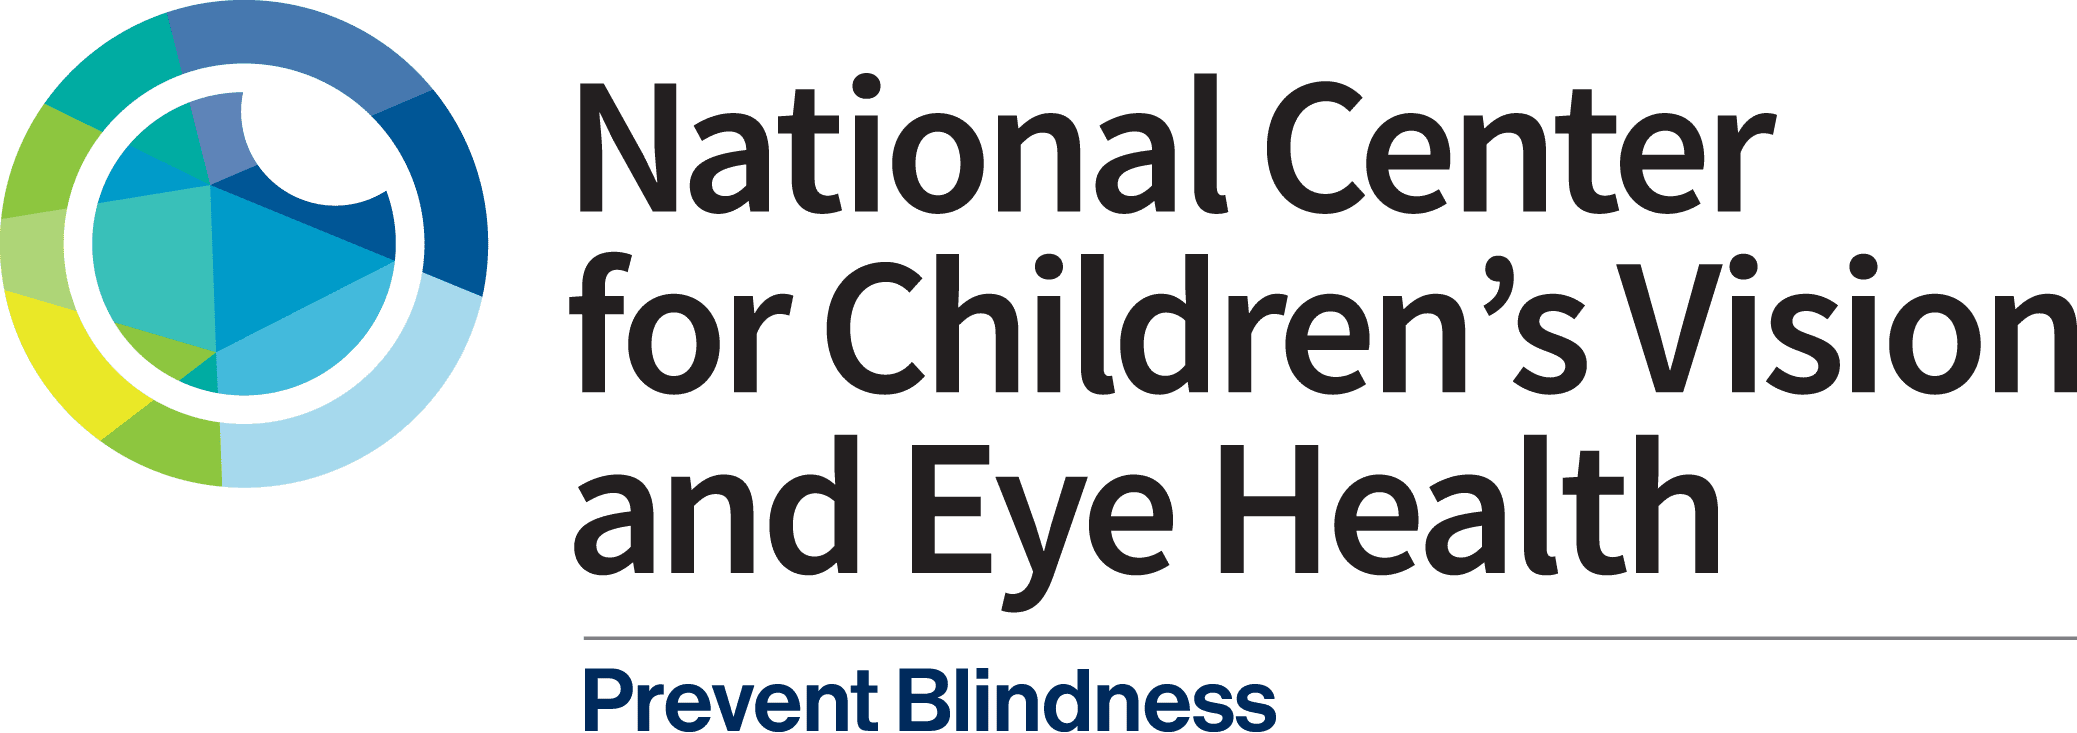 PB_National-Center-for-Childrens-Vision-and-Eye-Health_RGB image